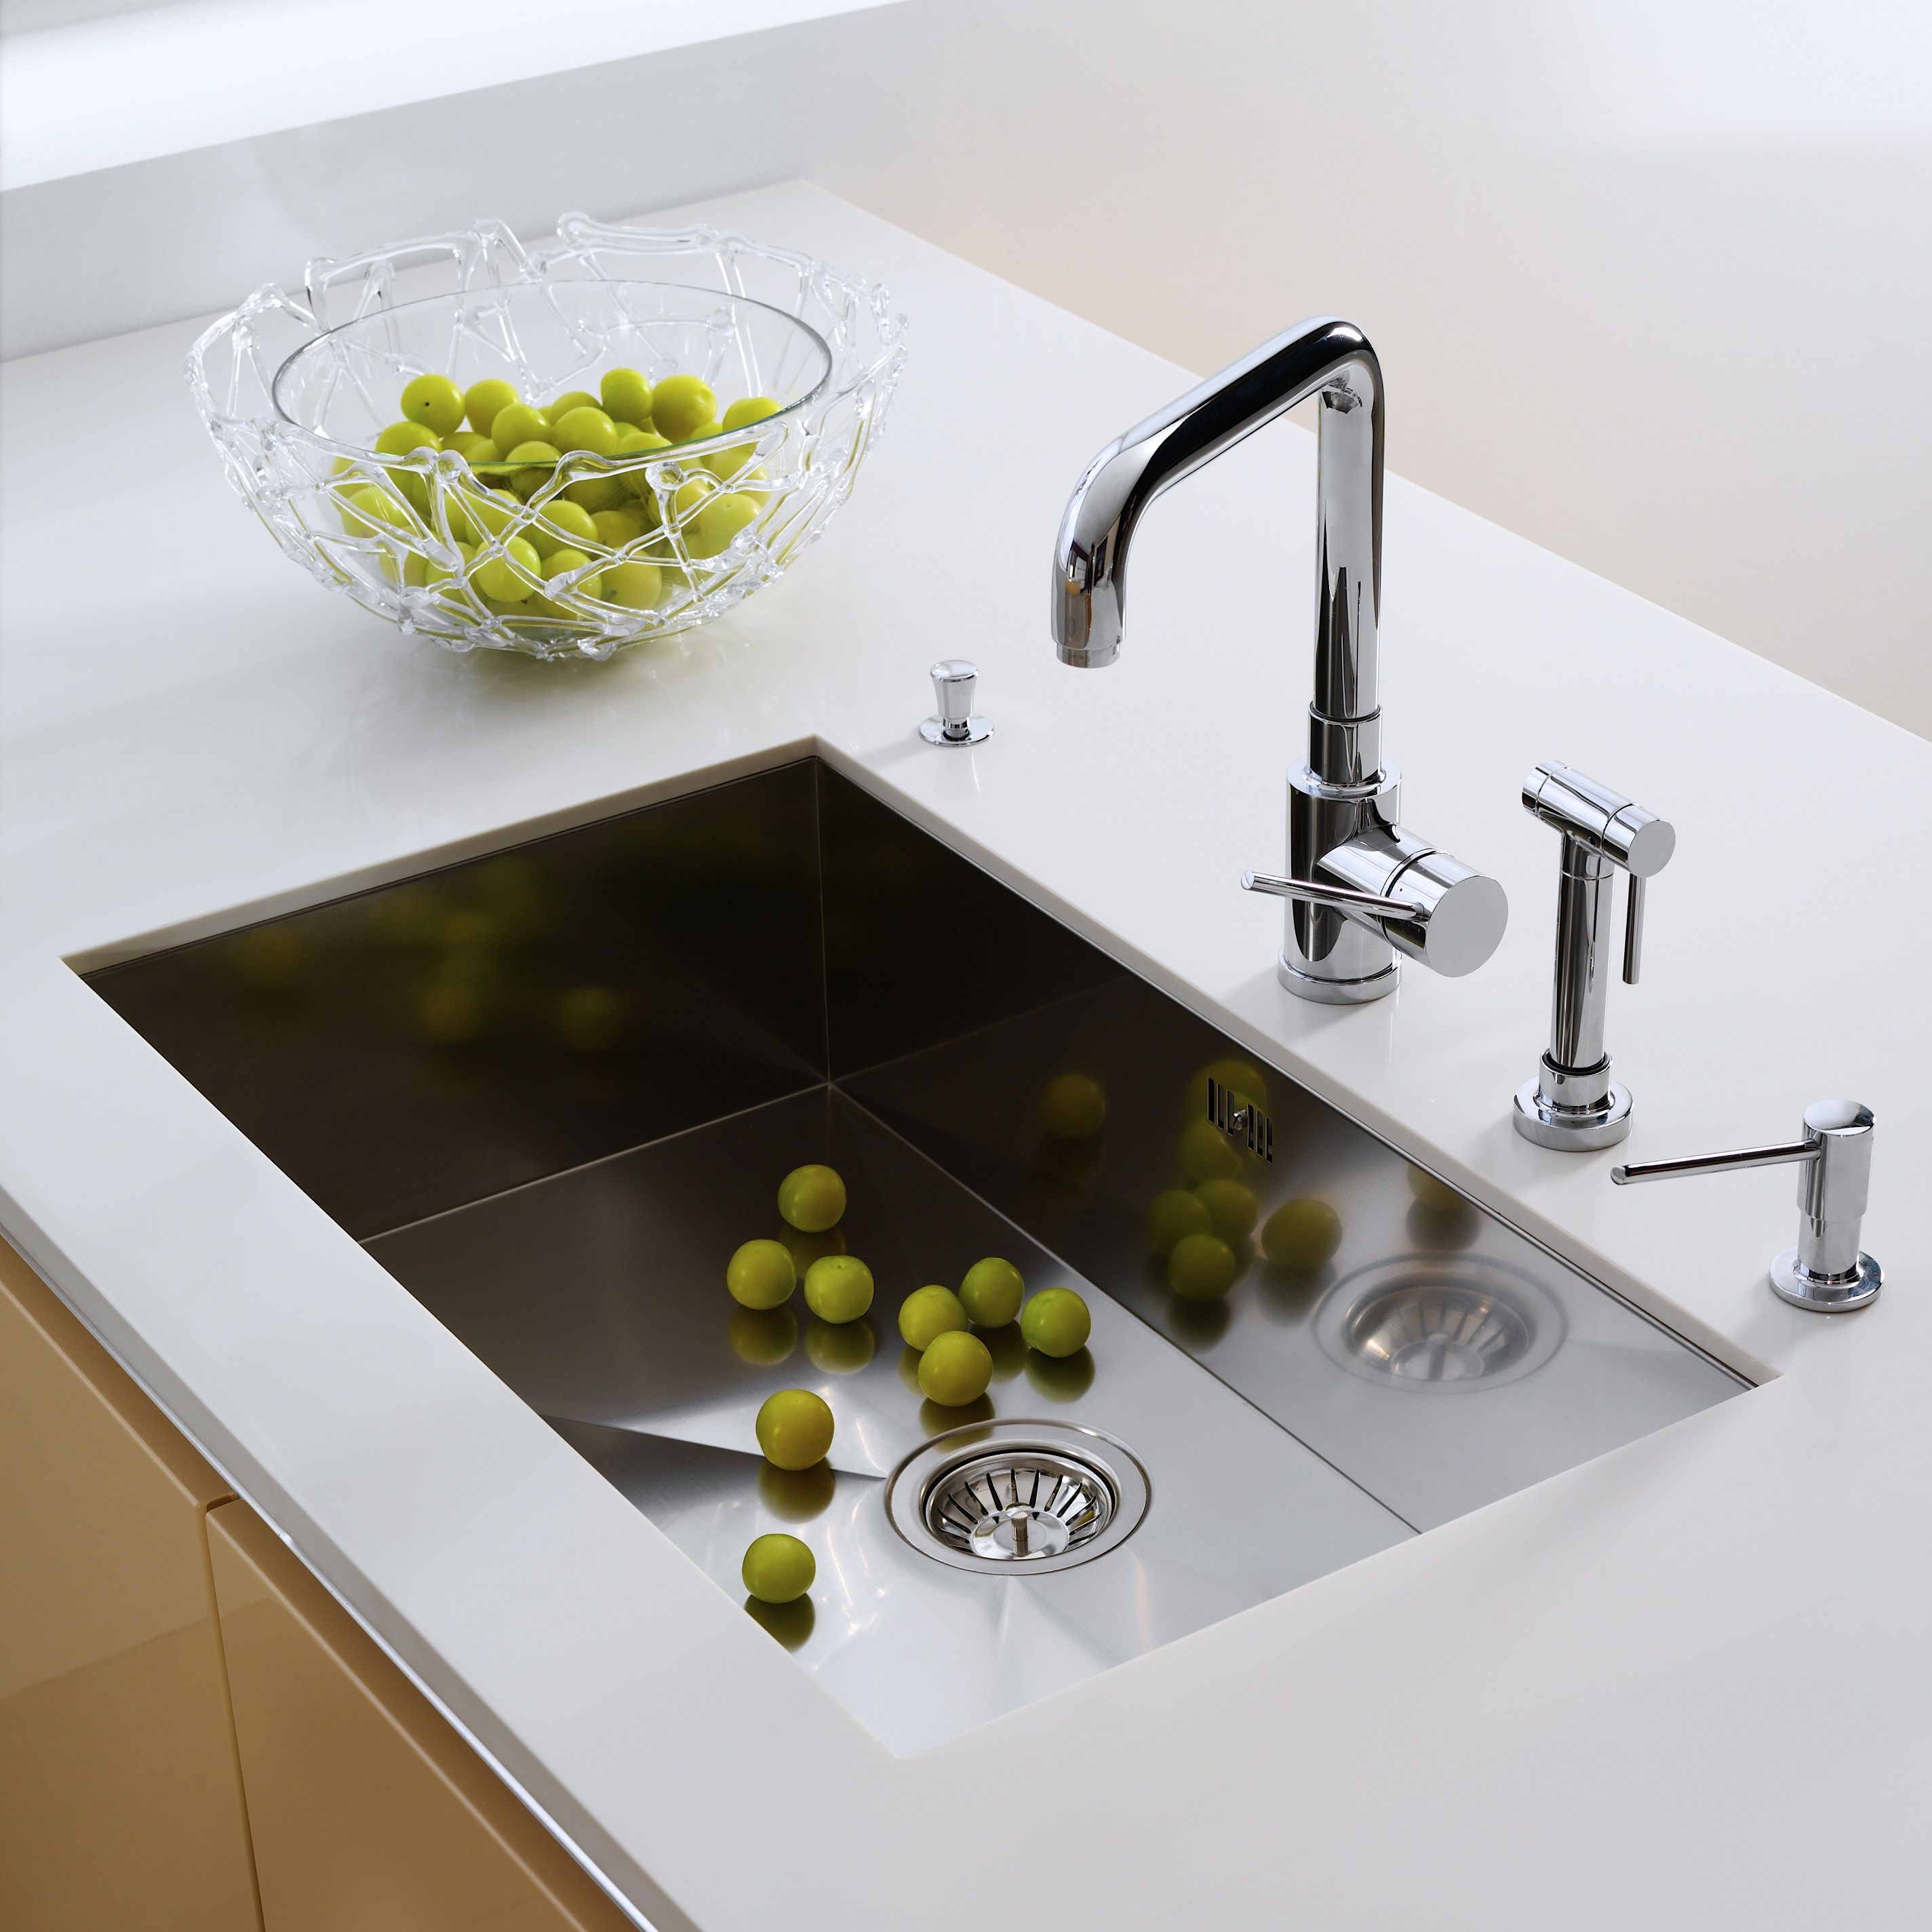 Large stainless kitchen sink